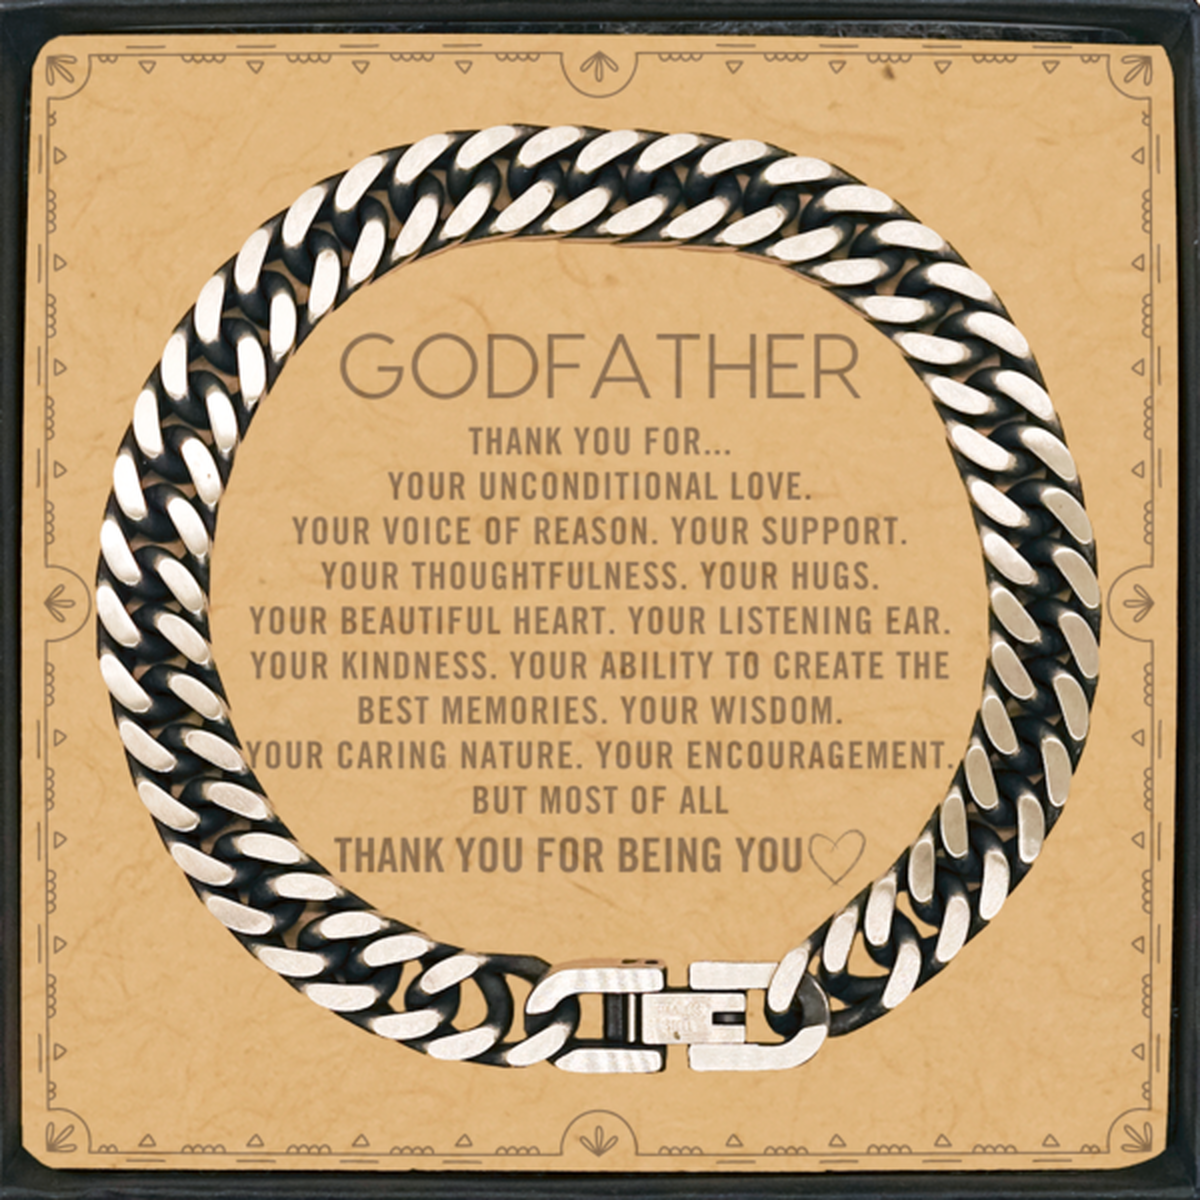 Godfather Cuban Link Chain Bracelet Custom, Message Card Gifts For Godfather Christmas Graduation Birthday Gifts for Men Women Godfather Thank you for Your unconditional love